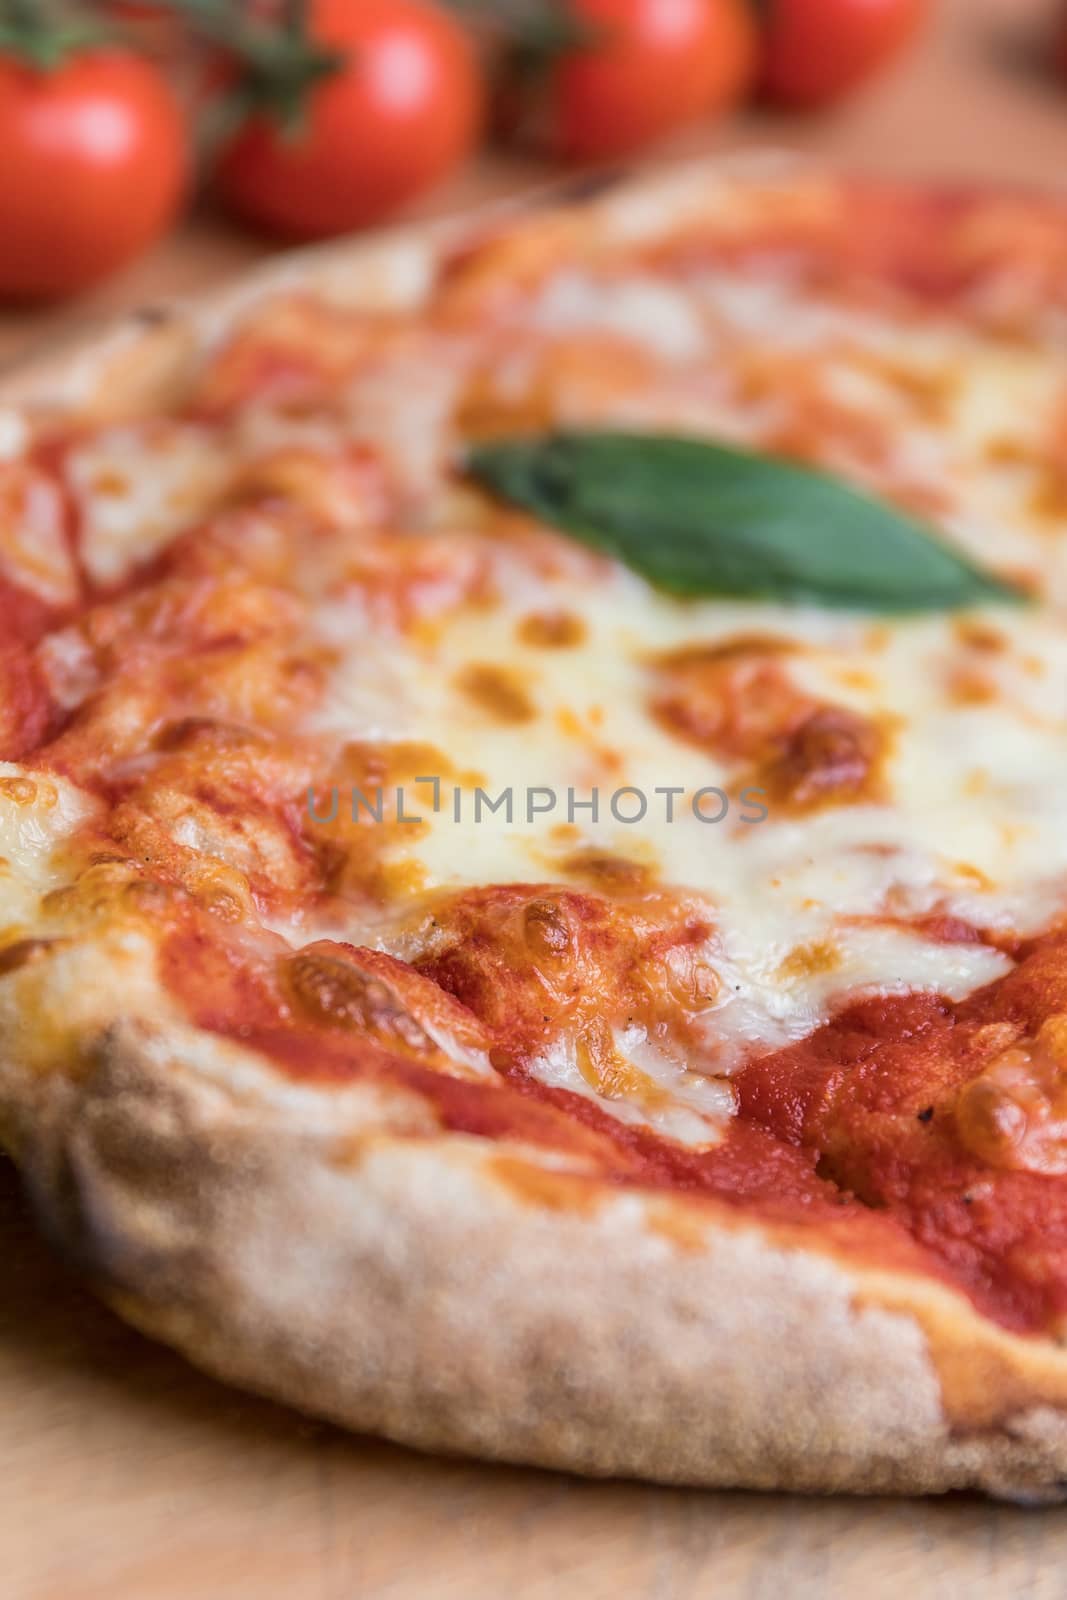 Pinsa romana. Typical pizza of Rome, Italy. A modern take on the ancient Roman pizza. Tasty, light and fragrant made with the best organic ingredients.